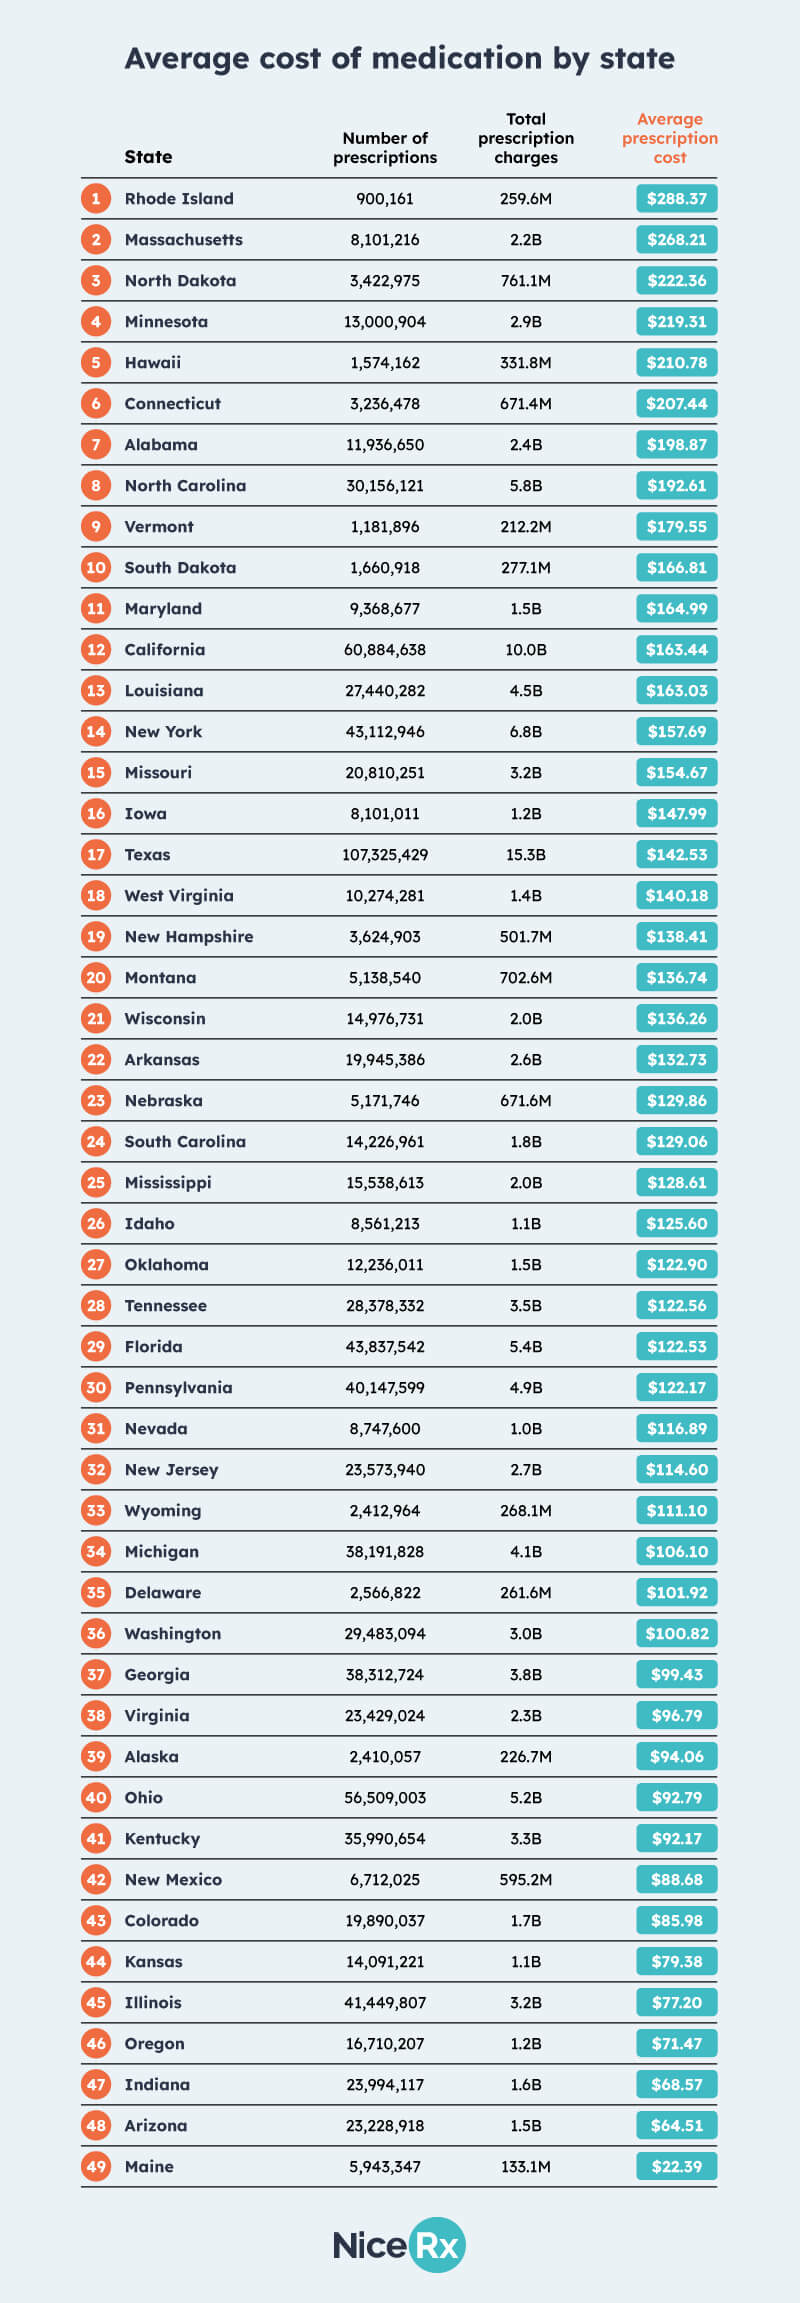 Average cost of medication by state